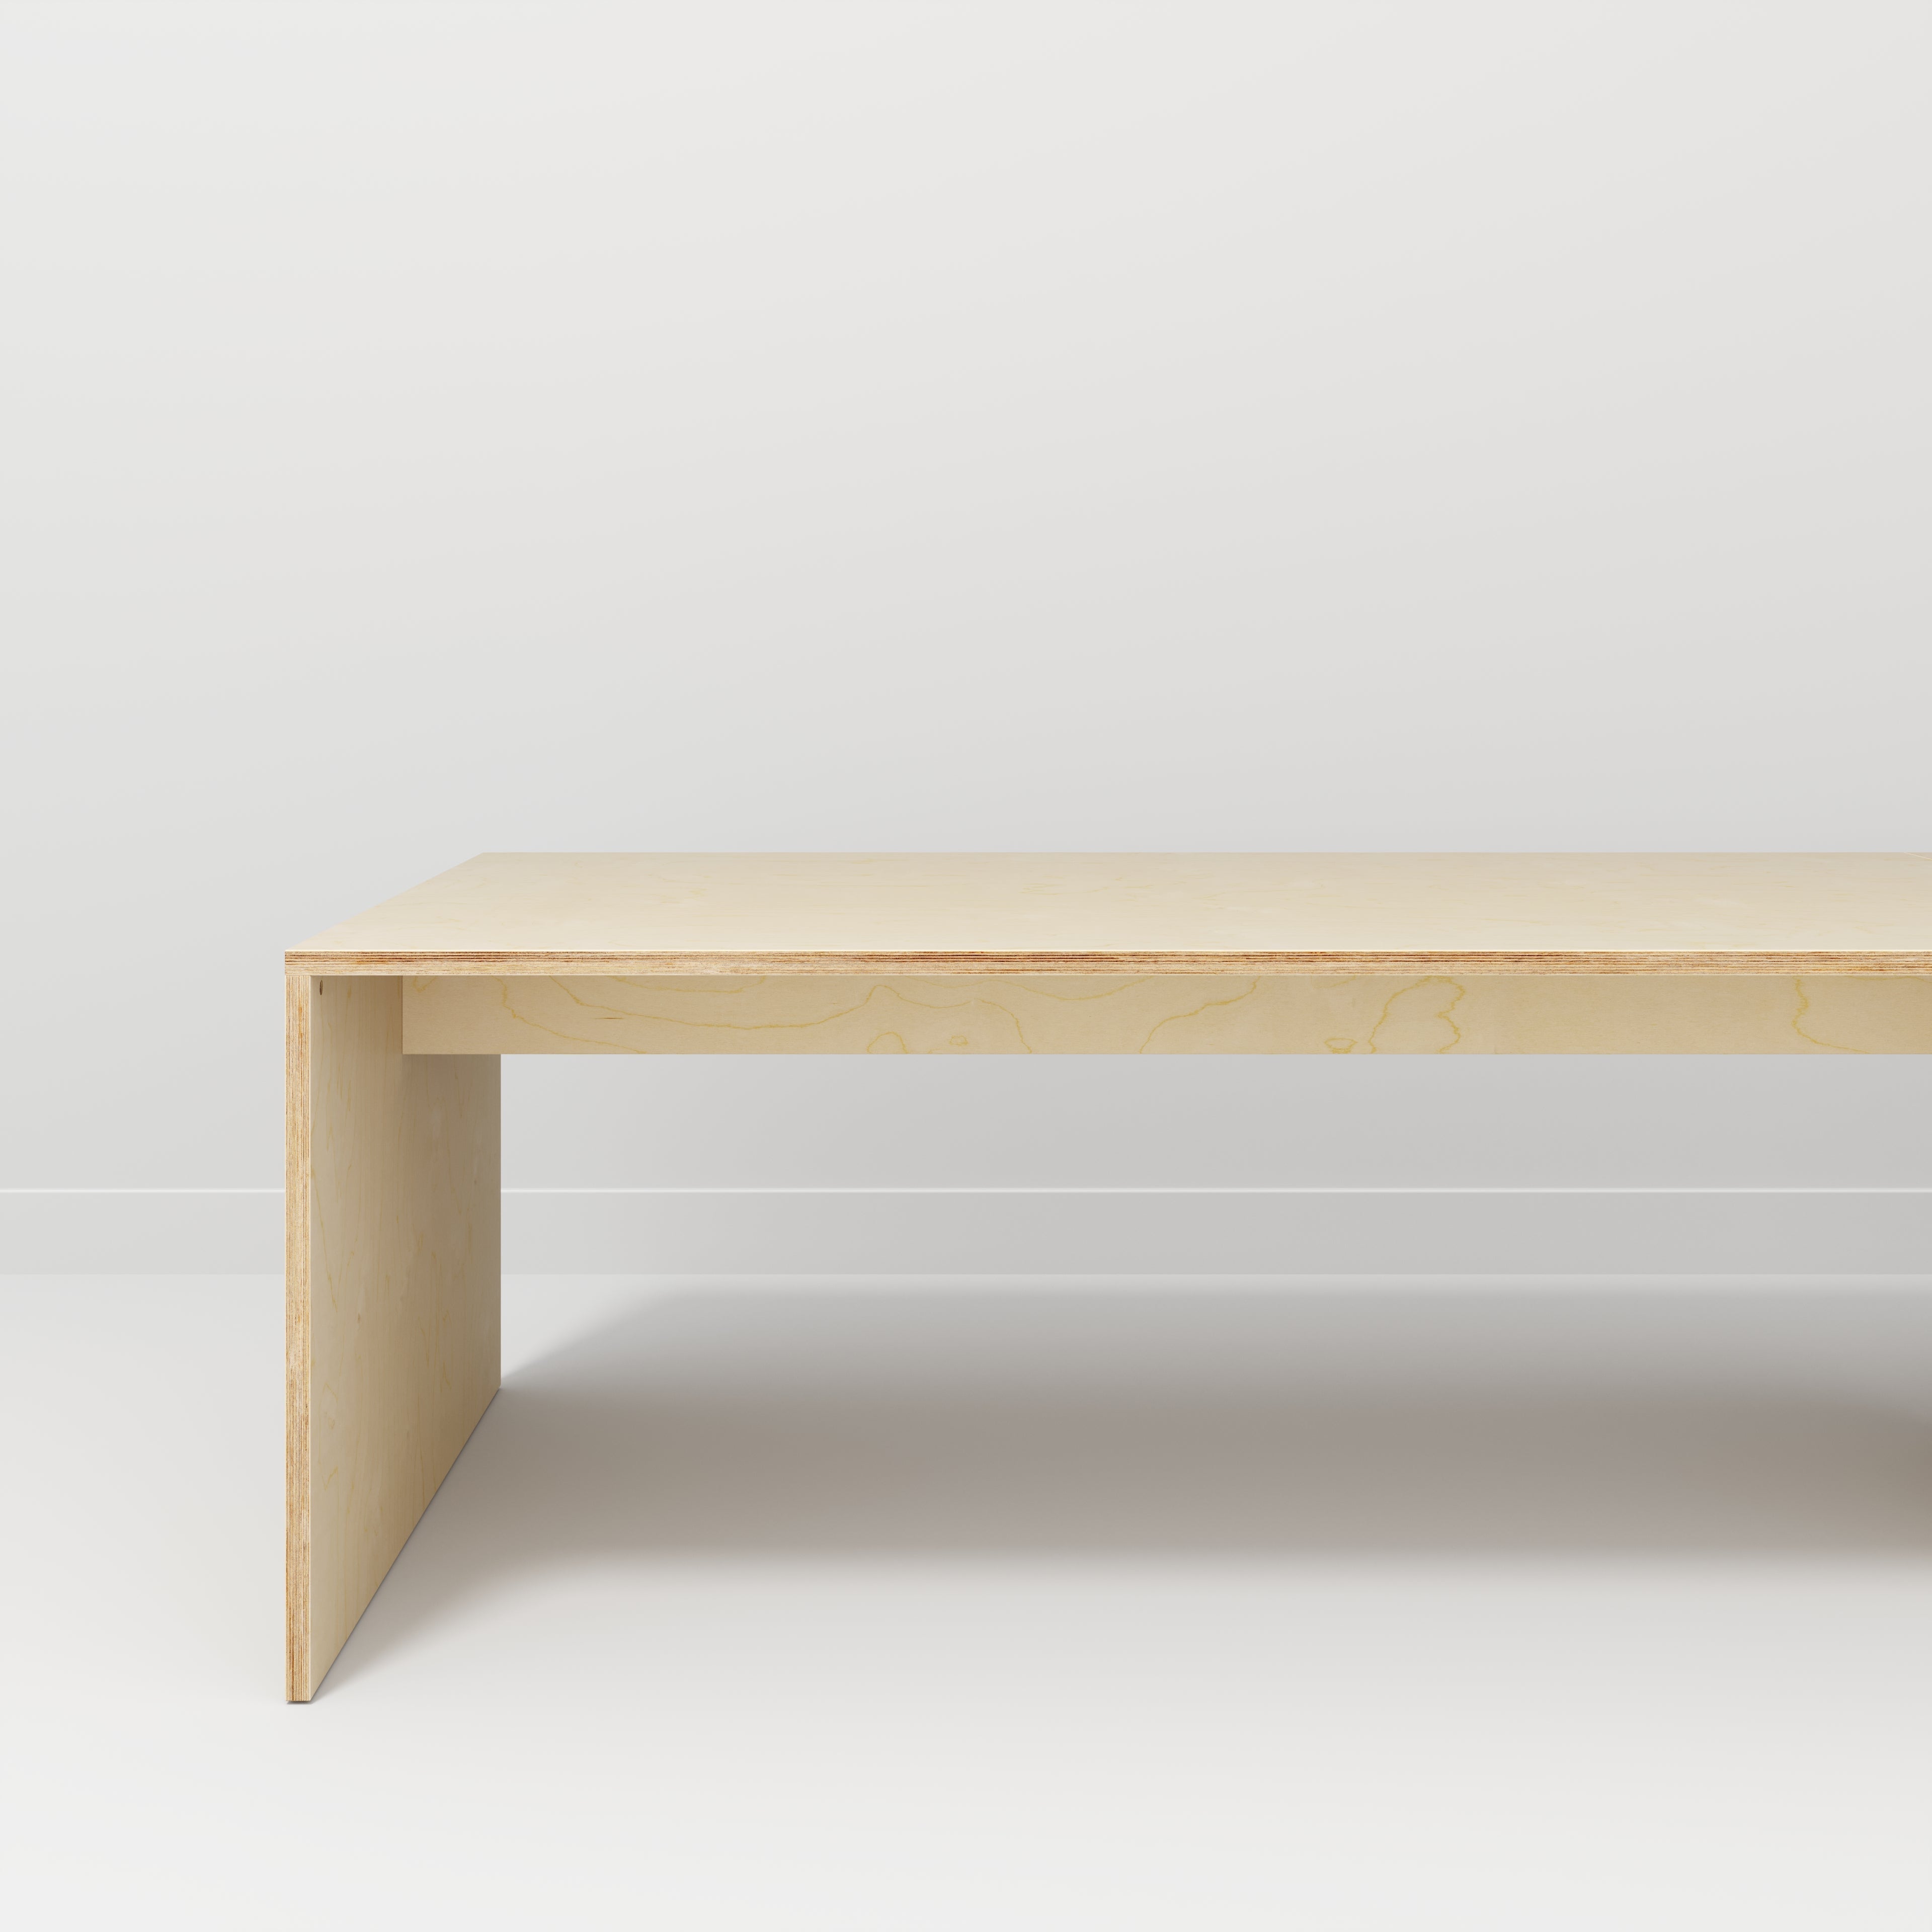 Table with Solid Sides - Plywood Birch - 5600(w) x 1000(d) x 750(h)